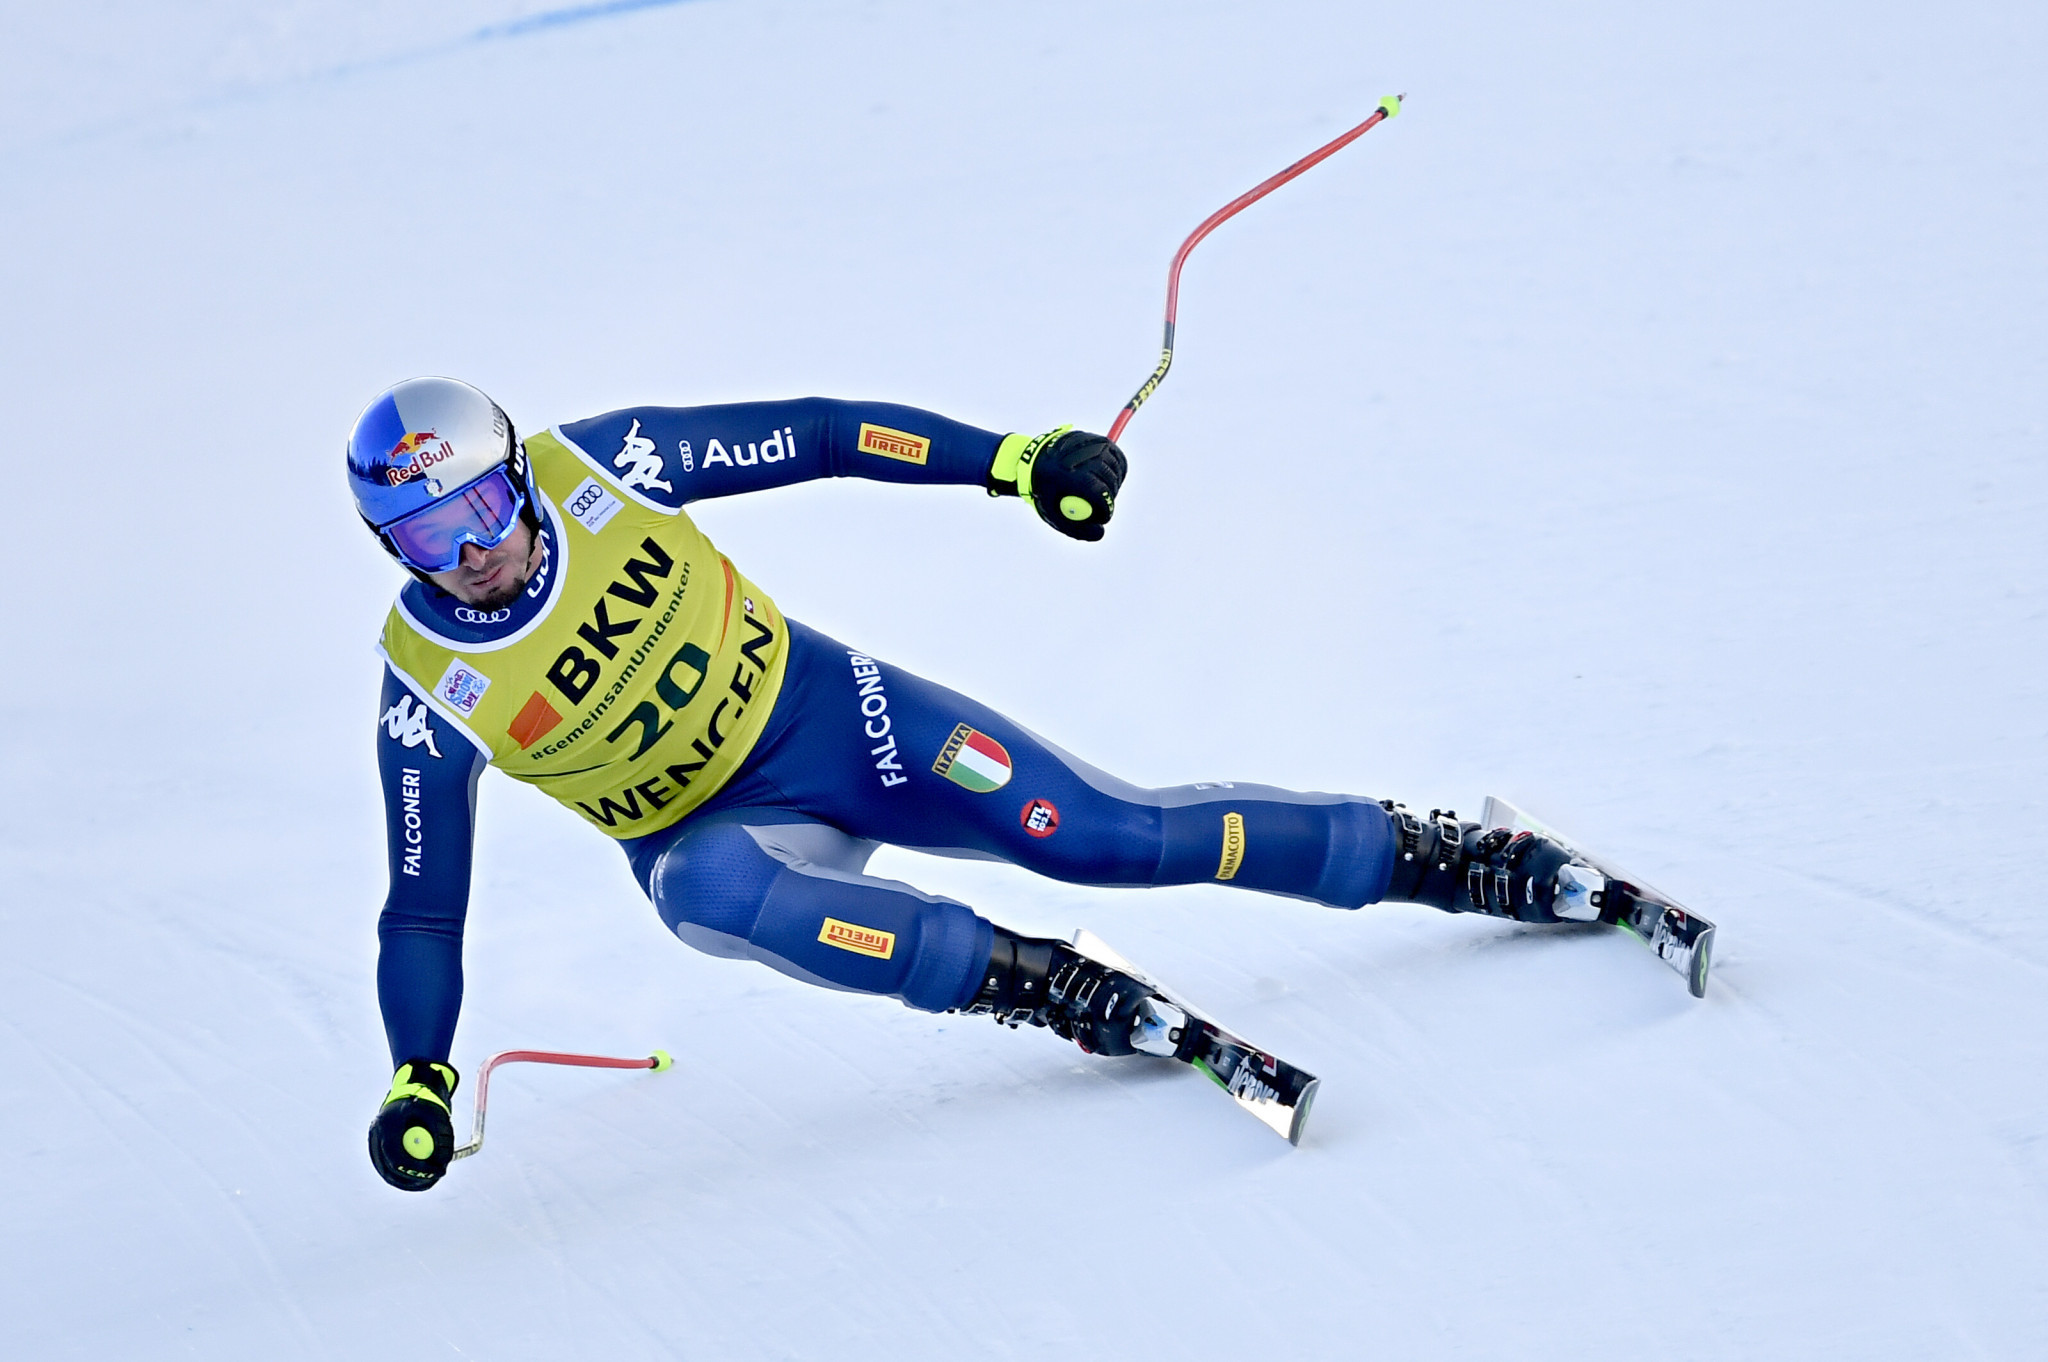 Dominik Paris of Italy will be looking to defend his super-G title at the 2021 FIS Alpine World Ski Championships in his home country ©Getty Images